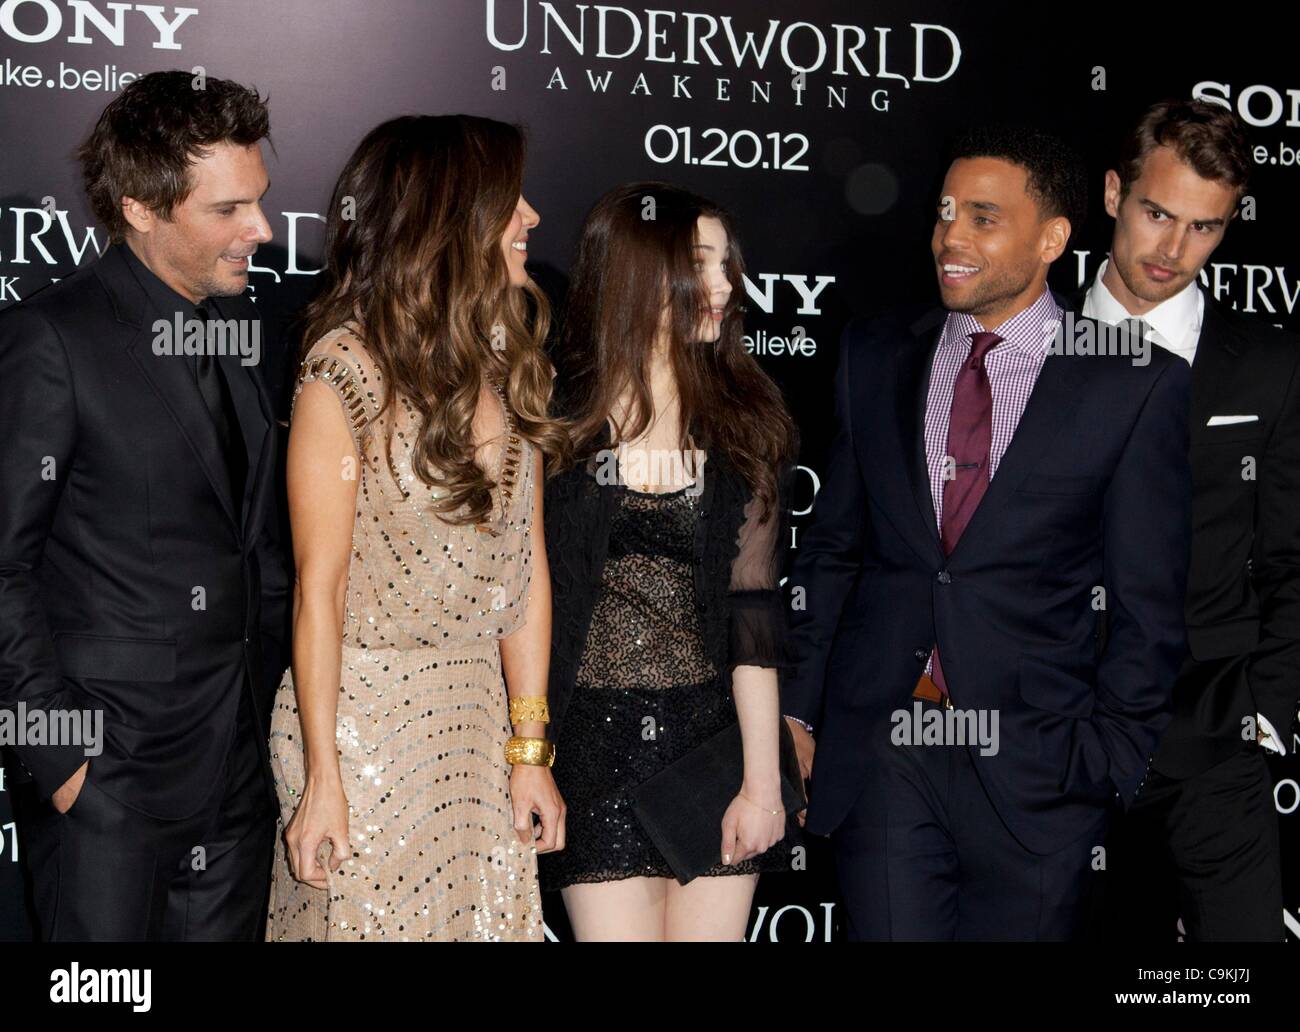 Len Wiseman, Kate Beckinsale, India Eisley, Michael Ealy, Theo James at arrivals for UNDERWORLD AWAKENING Premiere, Grauman's Chinese Theatre, Los Angeles, CA January 19, 2012. Photo By: Emiley Schweich/Everett Collection Stock Photo